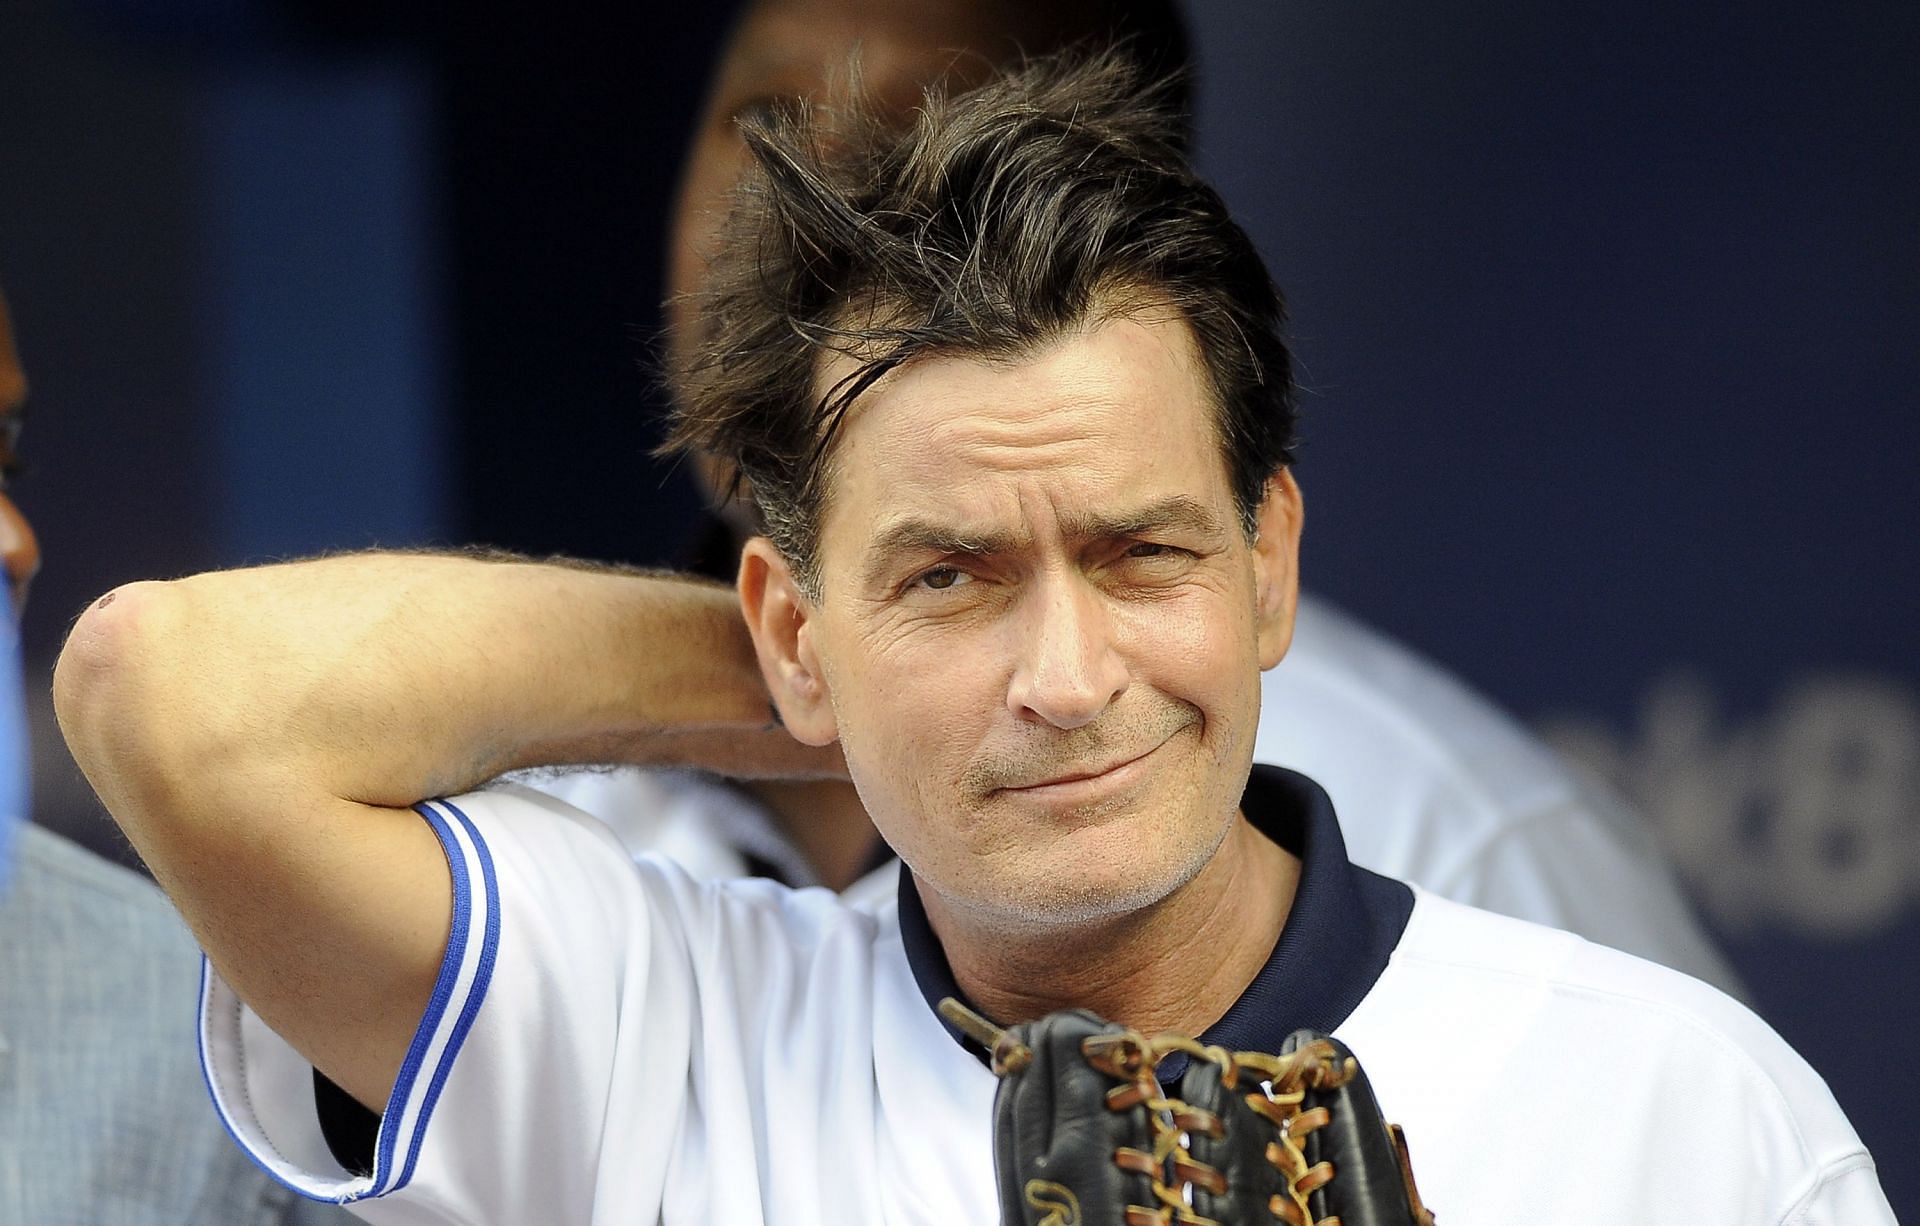 Actor Charlie Sheen threw out the ceremonial first pitch prior to a game between the Toronto Blue Jays and Chicago White Sox August 14, 2012, at Rogers Centre.